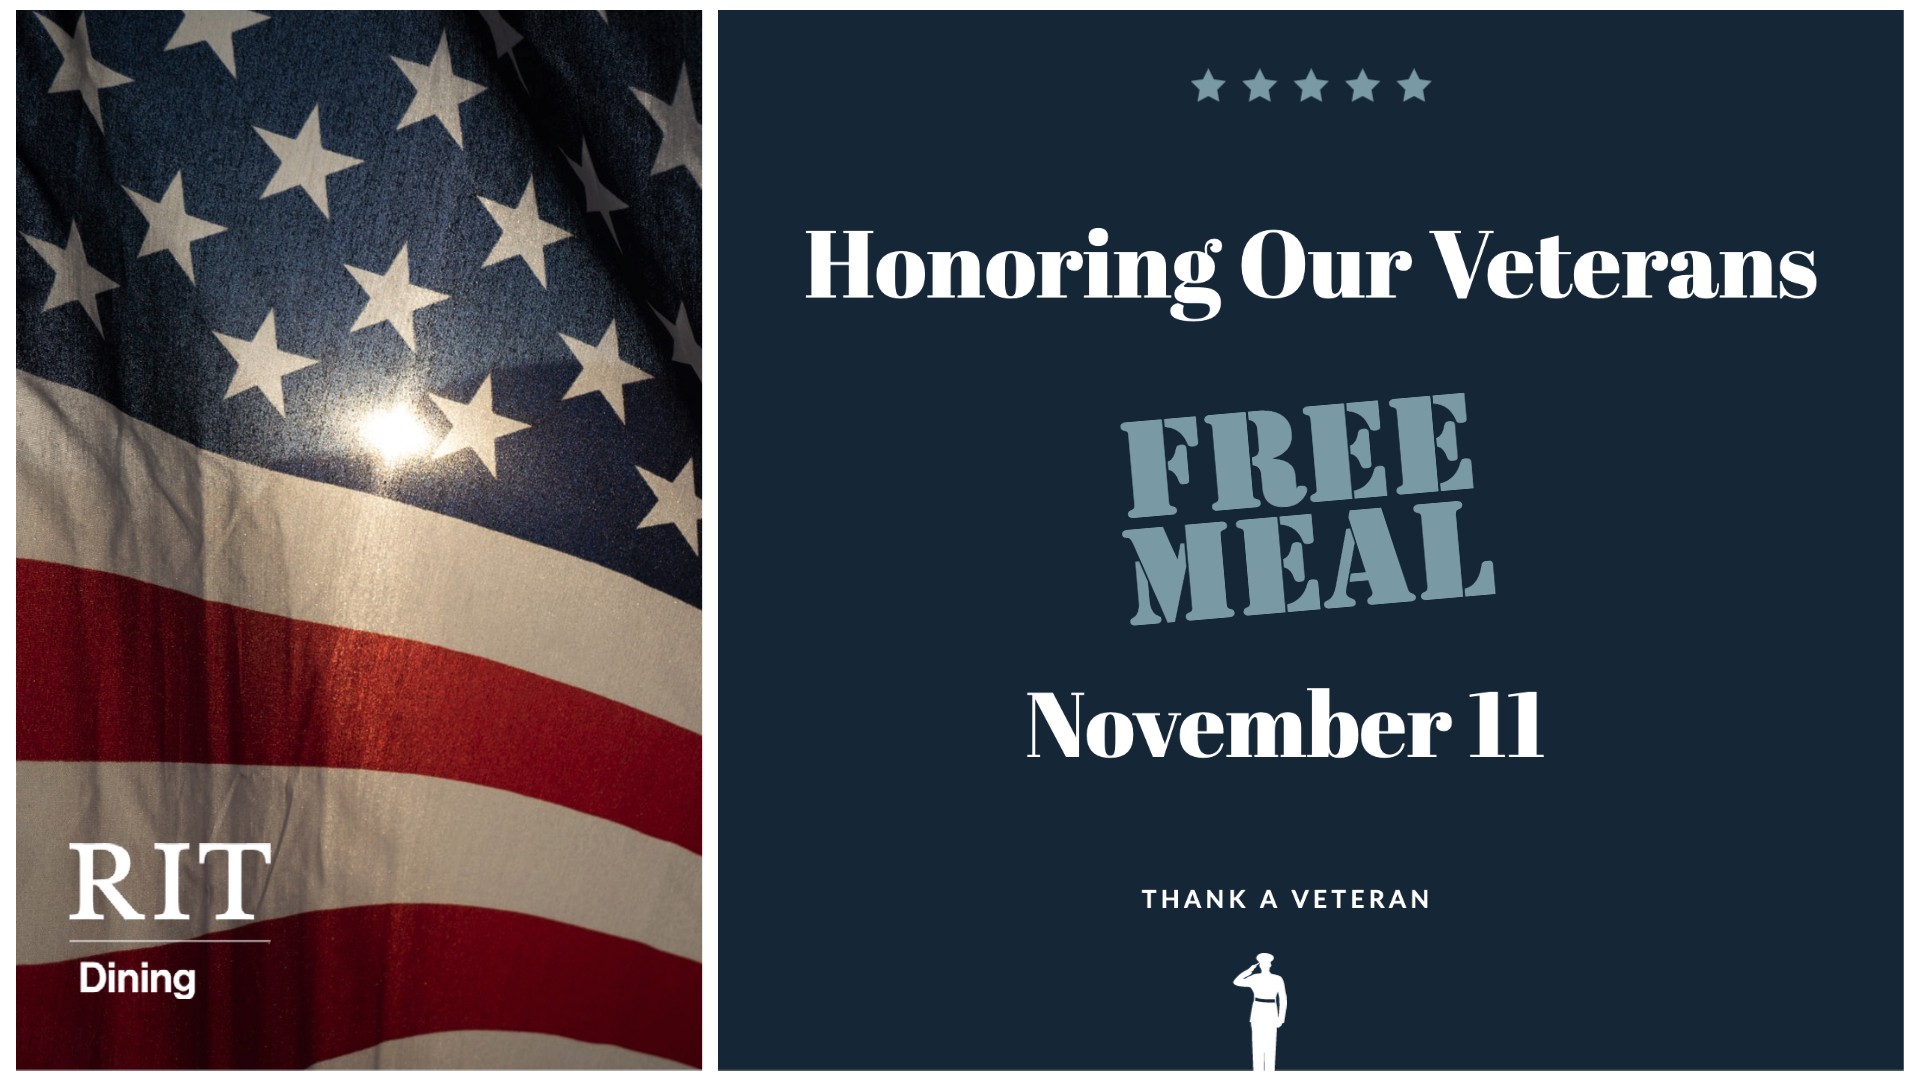 partial image of an American flag next to text on a blue background reading "Honoring Our Veterans, Free Meal, November 11"